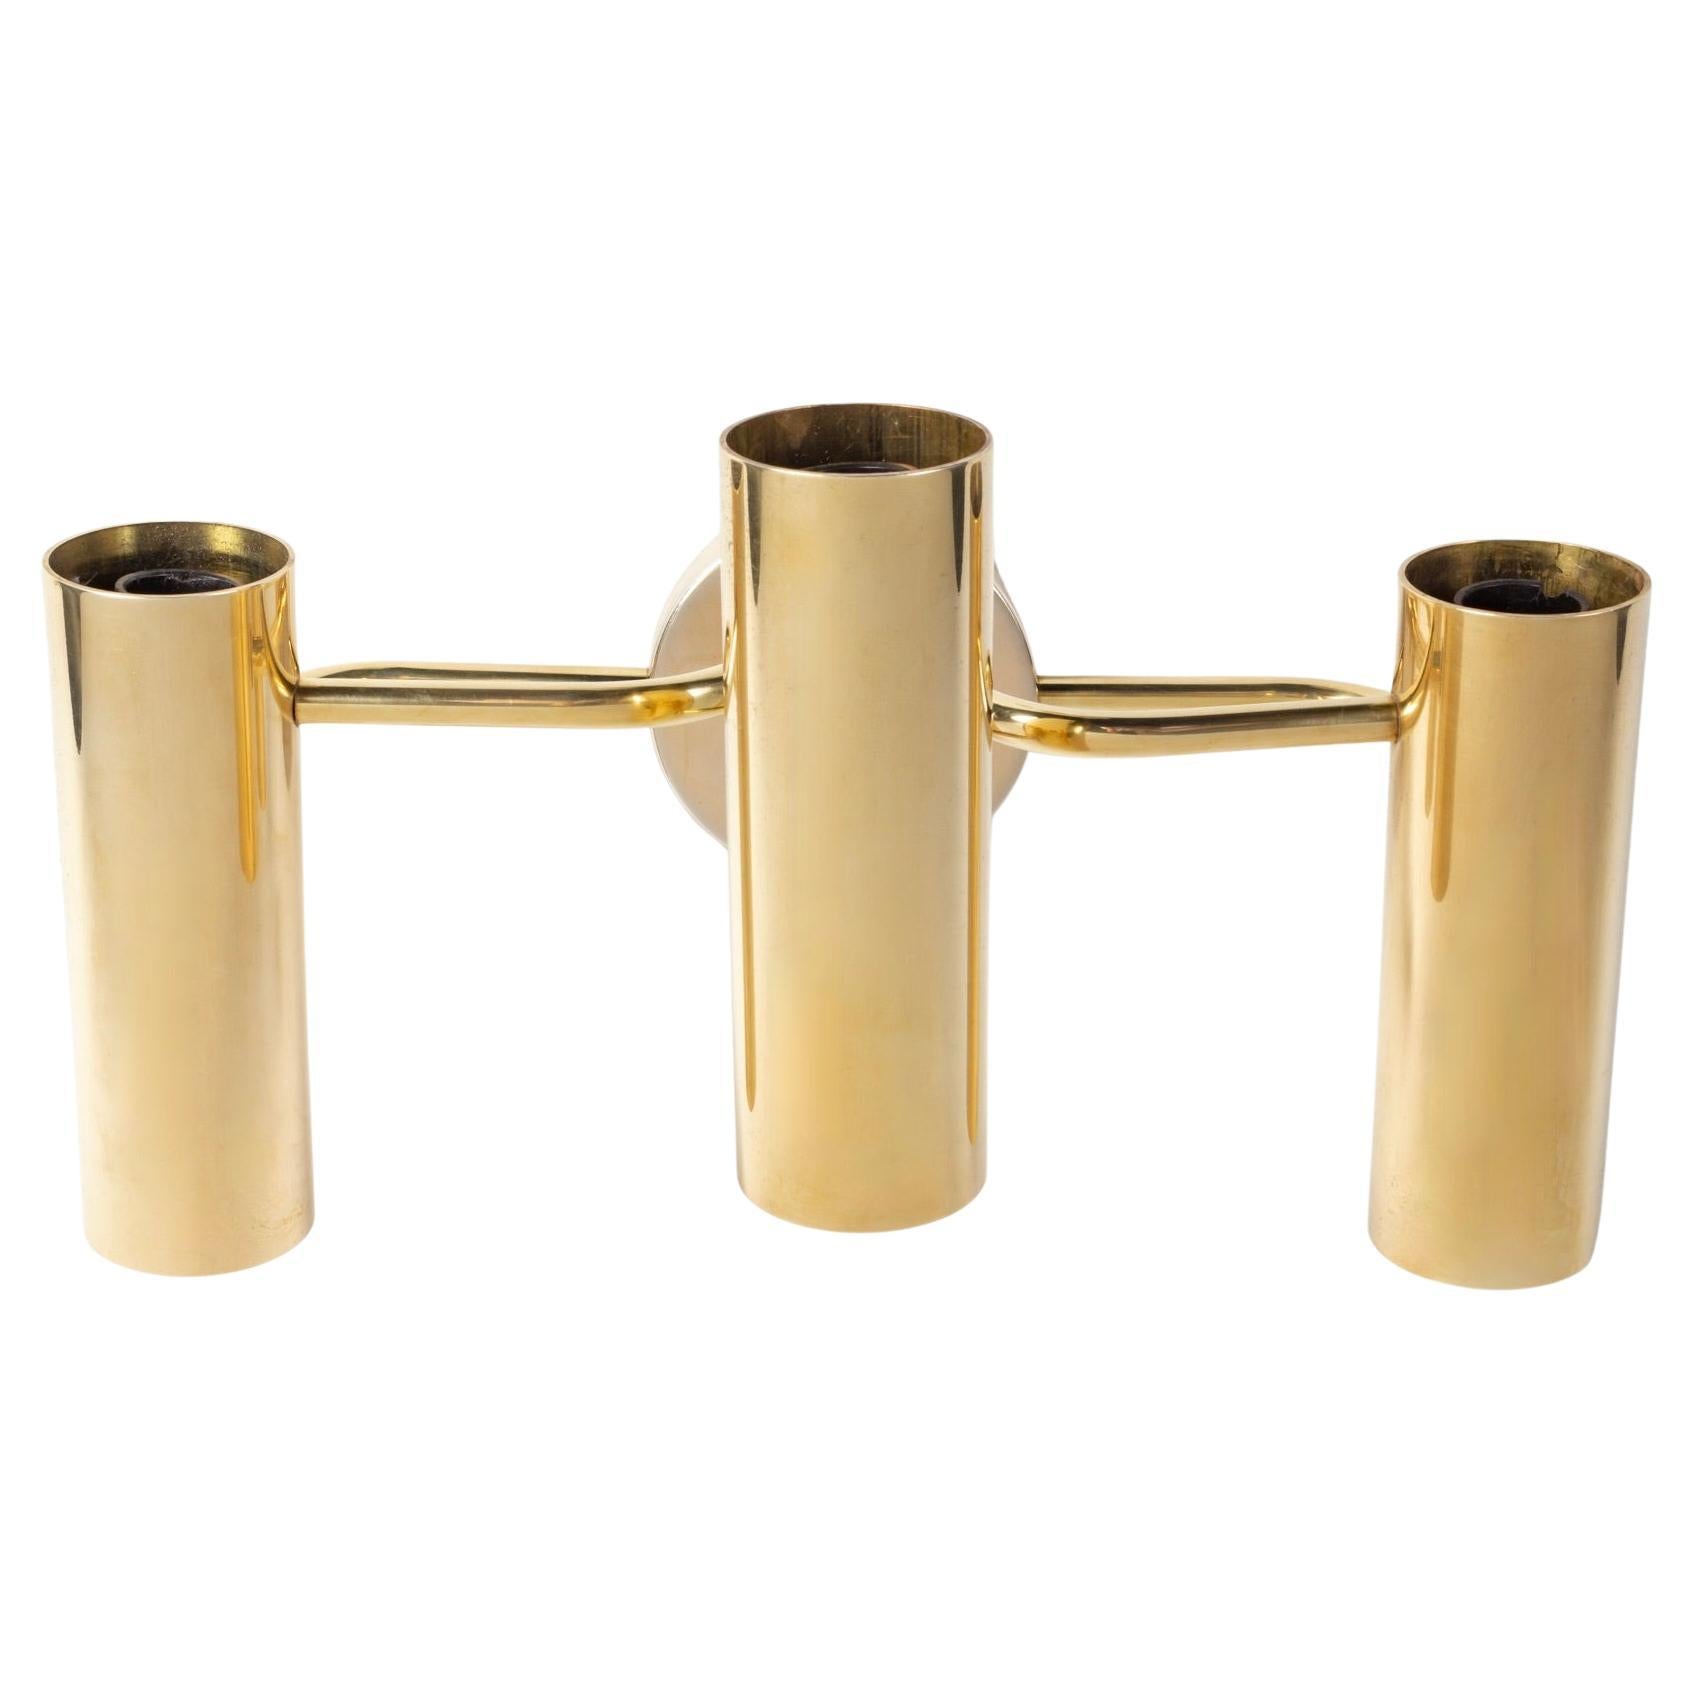 Pair of Gaetano Sciolari brass sconces from the 1960s.

The receptacles for three bulbs are made of three gilded brass cylinders positioned at two different heights and mounted on curved gilded brass rods meeting at the back on a round gilded brass